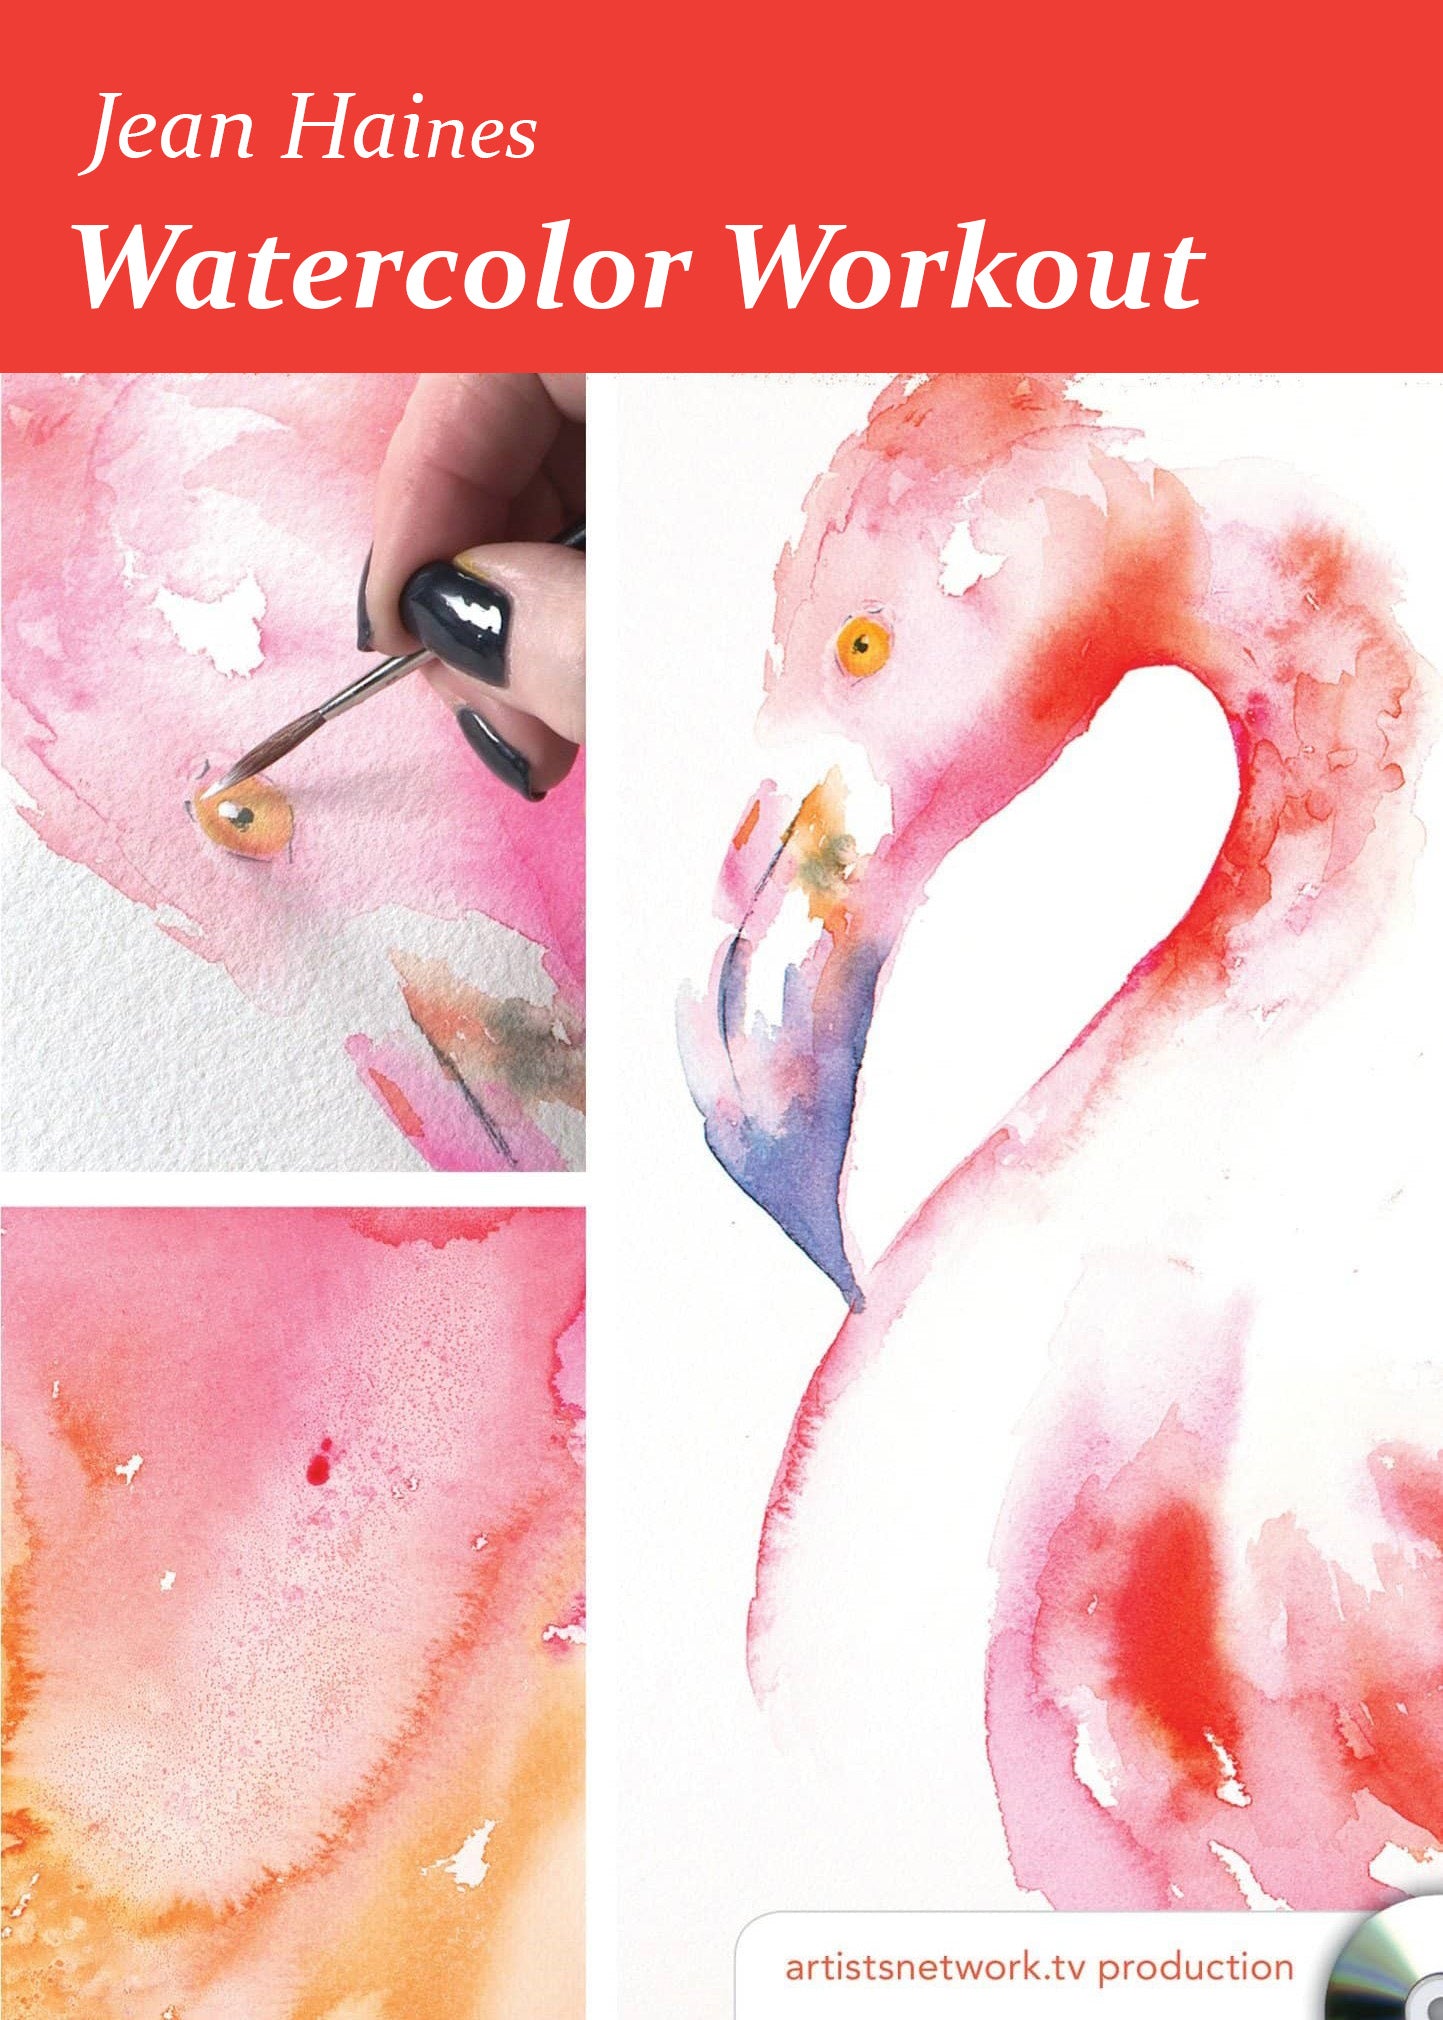 Jean Haines: Watercolor Workout